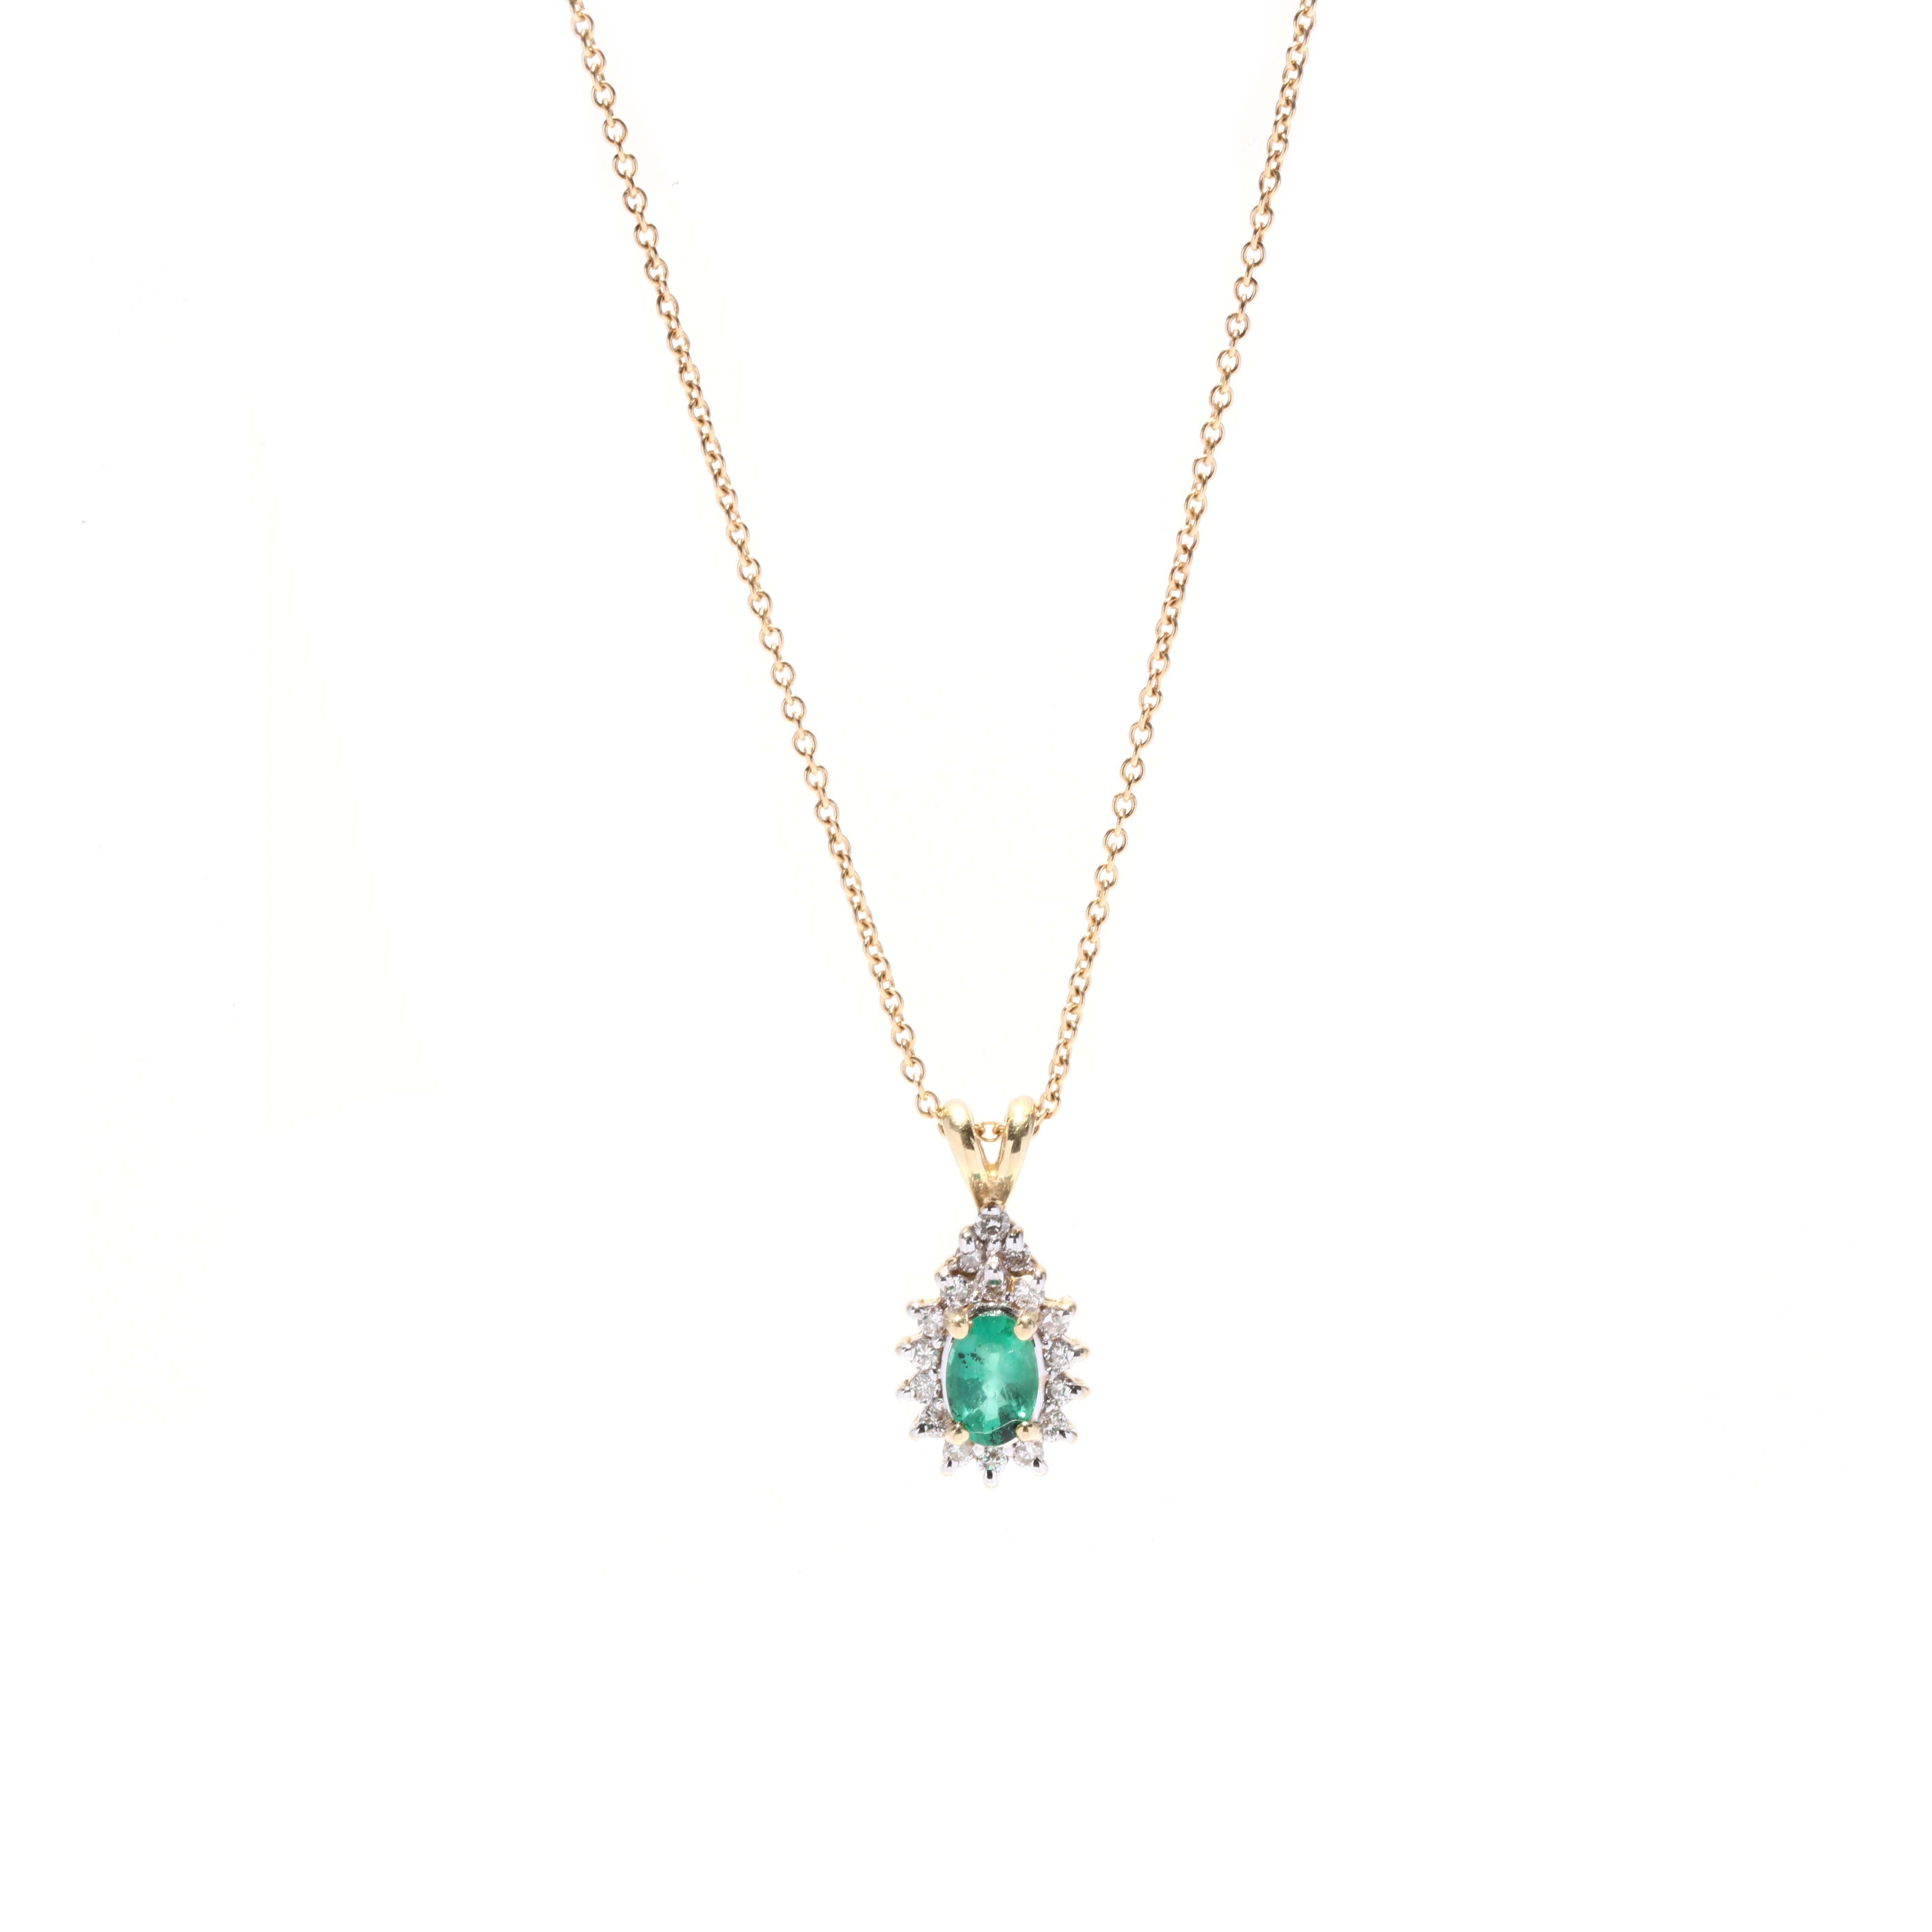 A vintage 14 karat yellow gold emerald and diamond halo pendant necklace. This May birthstone necklace features a prong set, oval cut emerald weighing approximately .50 carat surrounded by a halo of round brilliant cut diamonds weighing